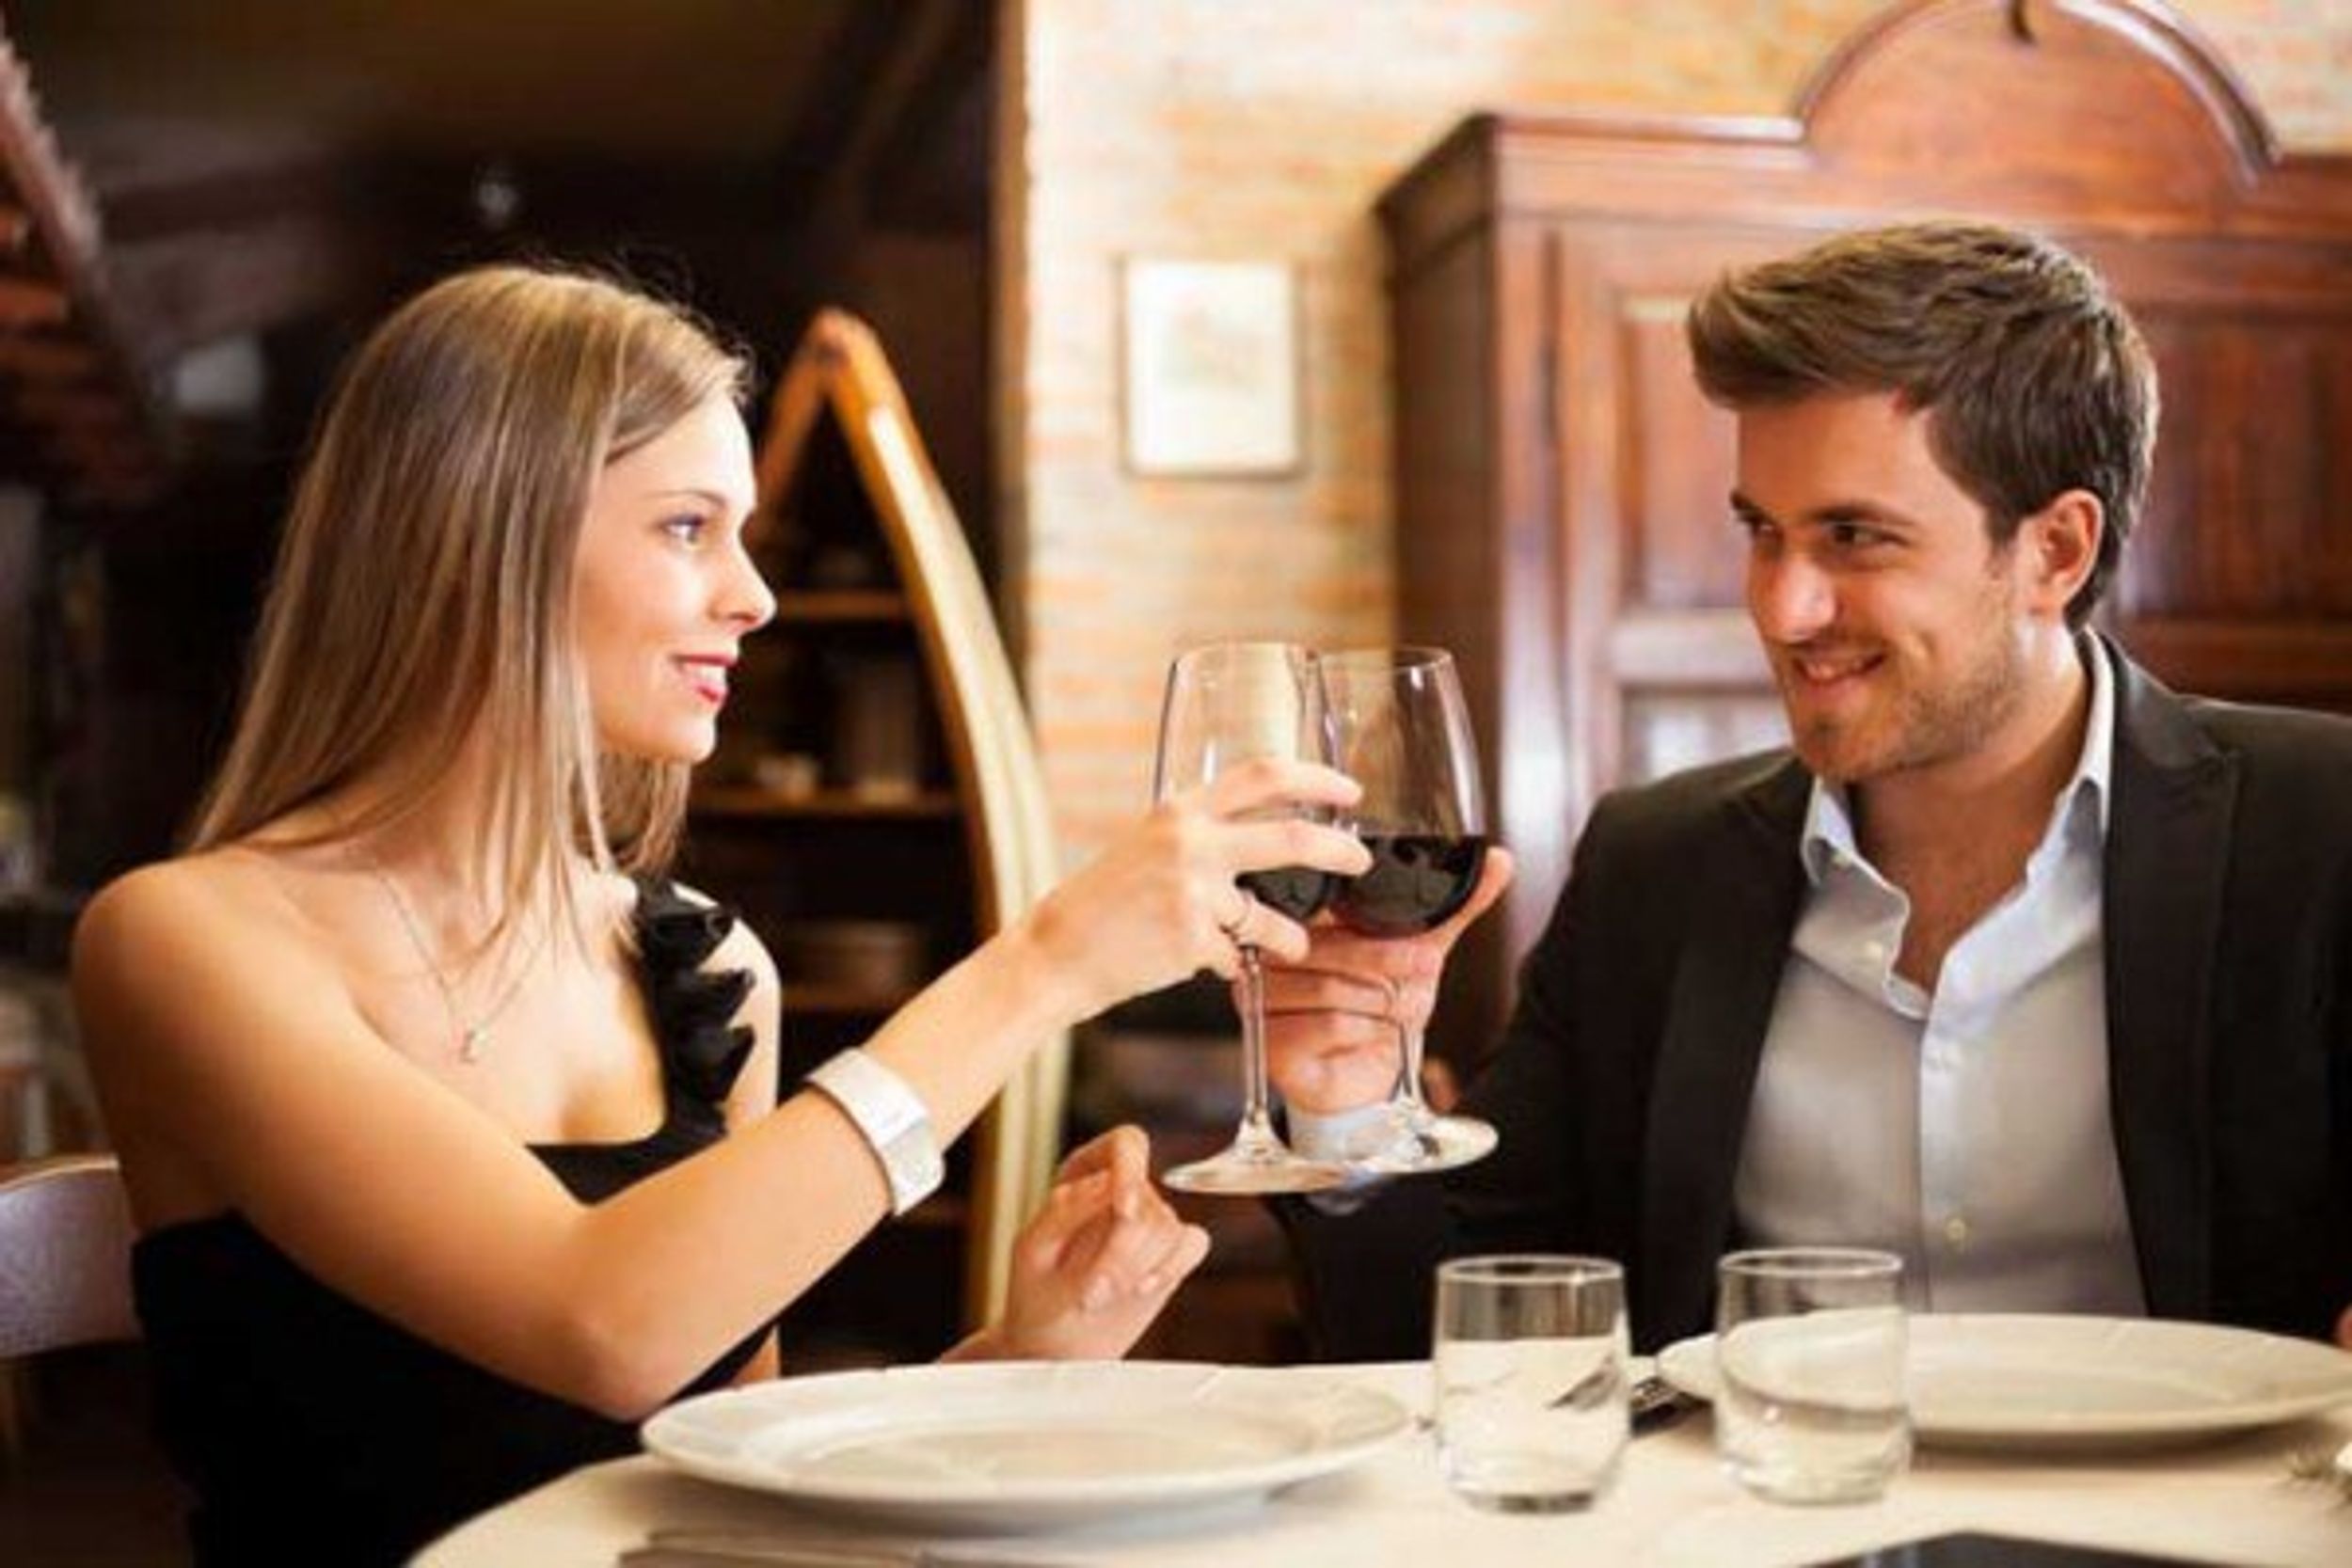 23 People On Their Ideal First Date